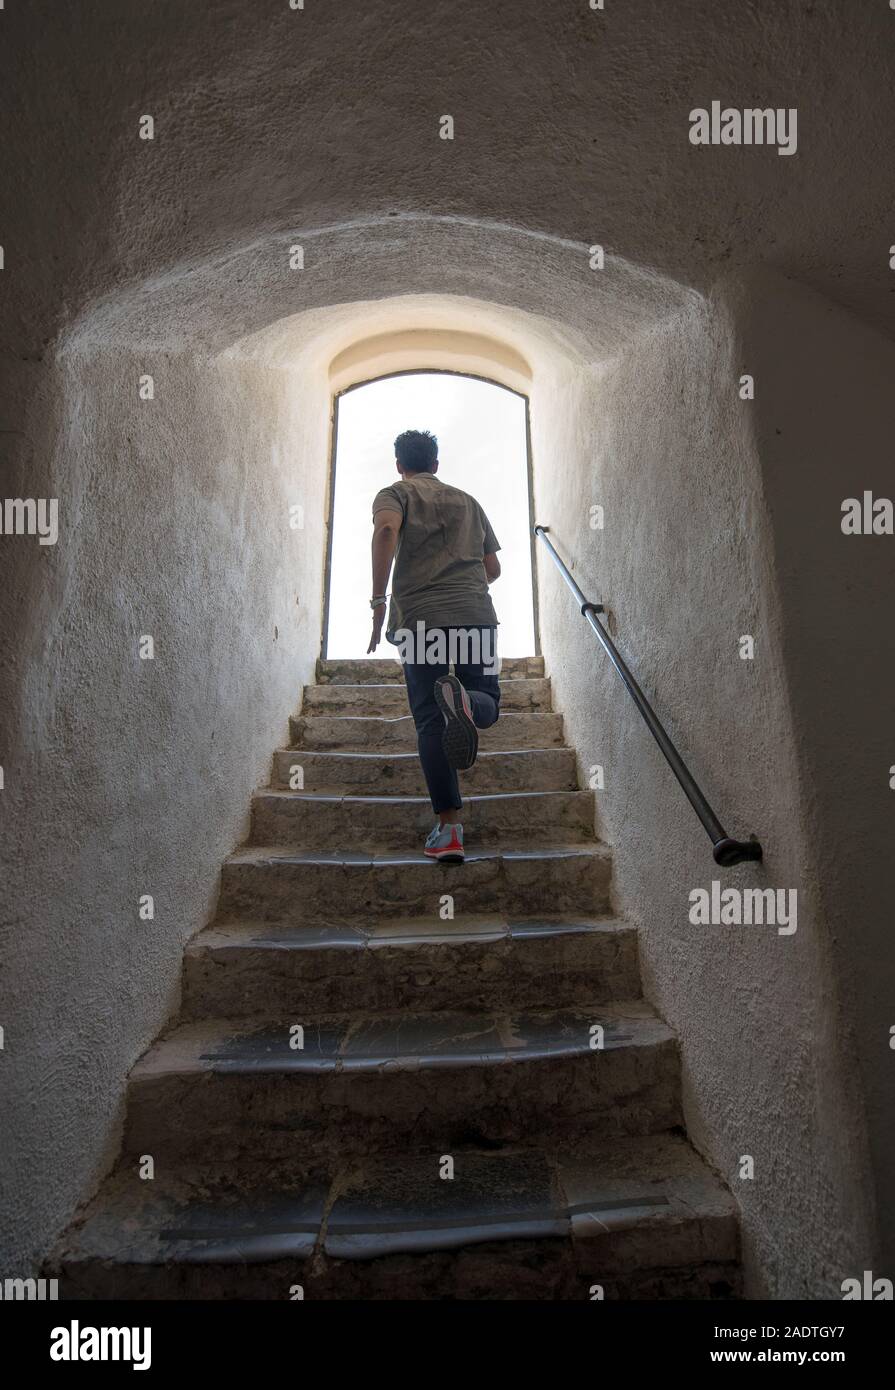 Man running away up a steep flight of stone stairs towards daylight through an arched exit at the top viewed from below Stock Photo